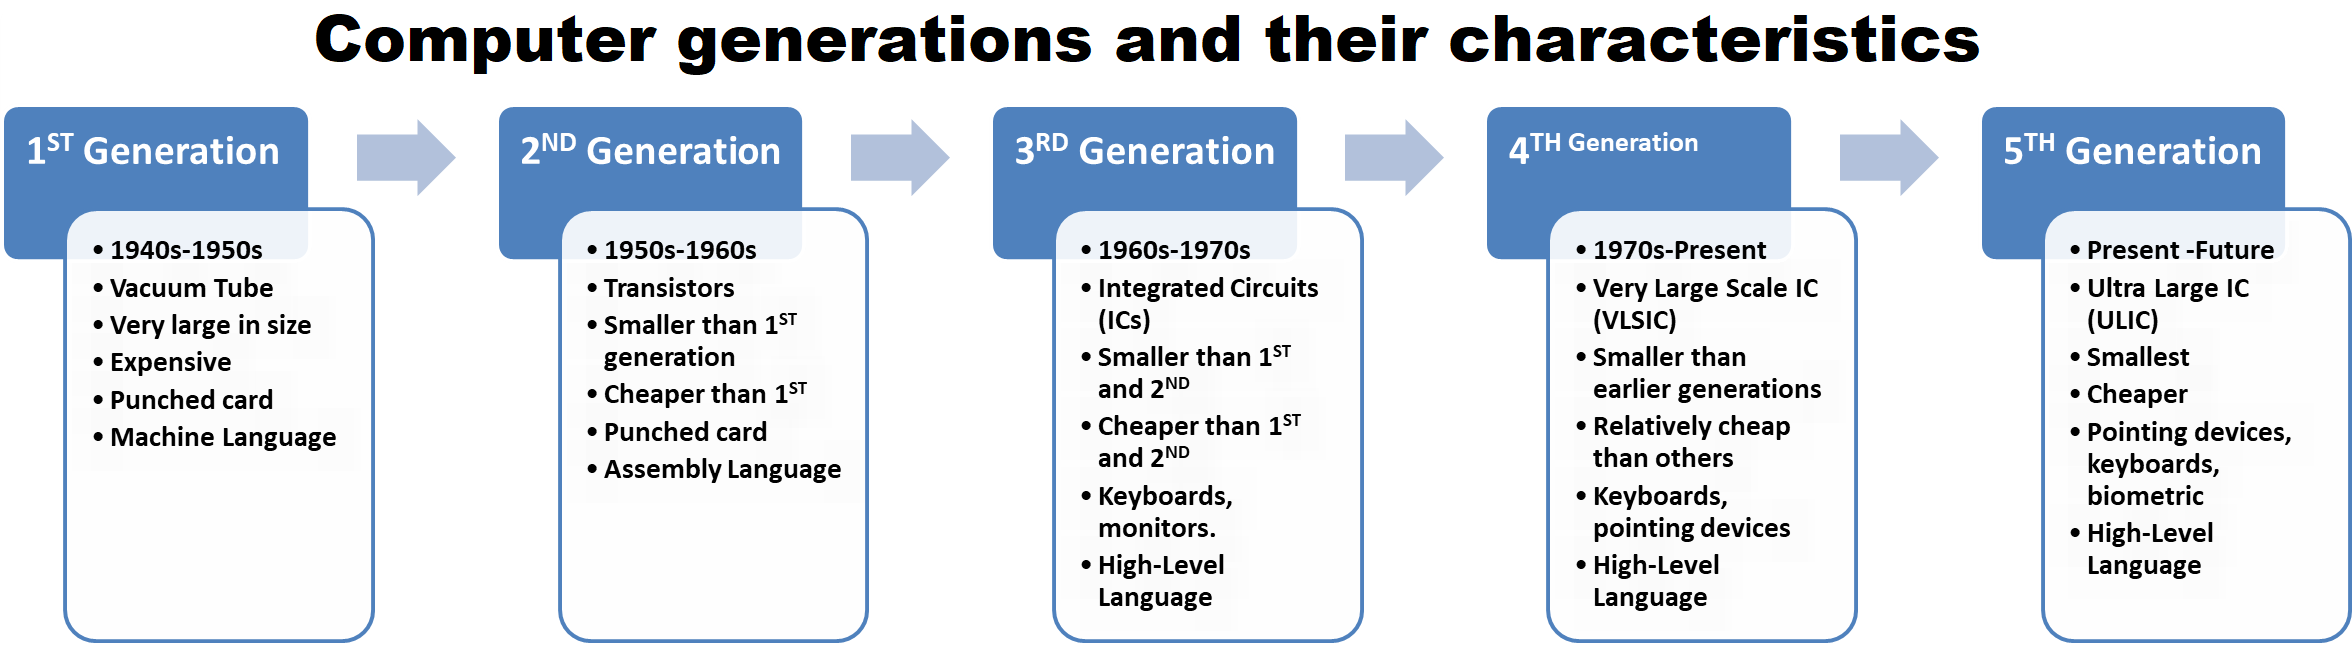 Computer generations and their characteristics